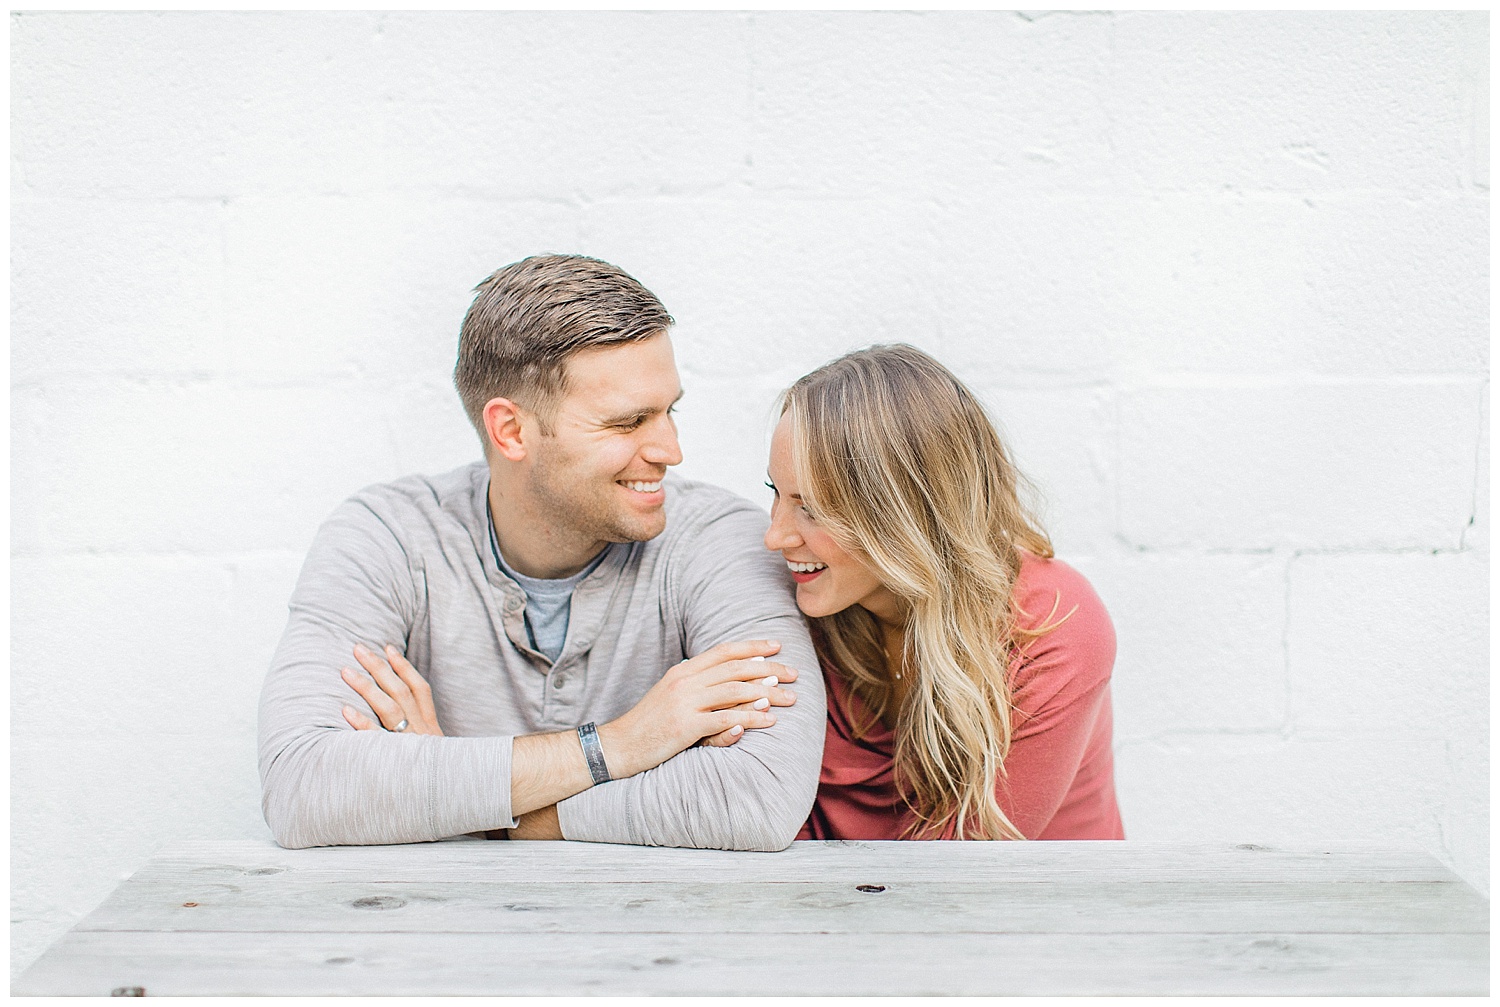 ERC_0800_Downtown Nashville Engagement Session at Barista Parlor | Emma Rose Company Wedding Photographer | Outfit Inspiration for Engagement Session | Kindred Light and Airy Photographer.jpg